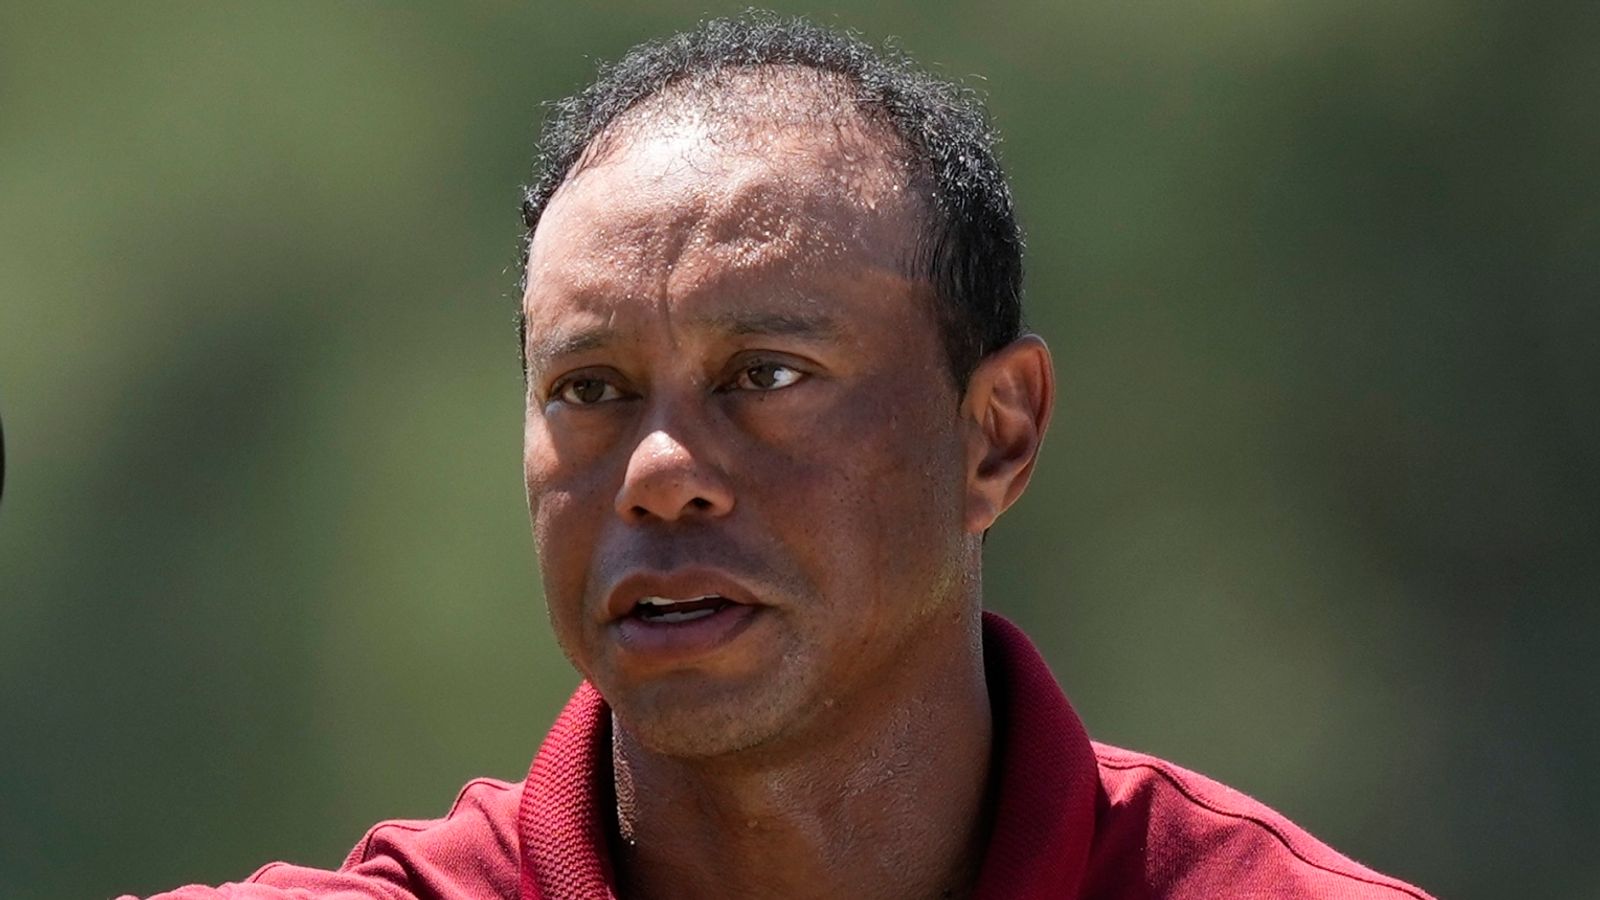 Tiger Woods to be Team USA’s next Ryder Cup captain? Woods ‘in talks’ over future captaincy role